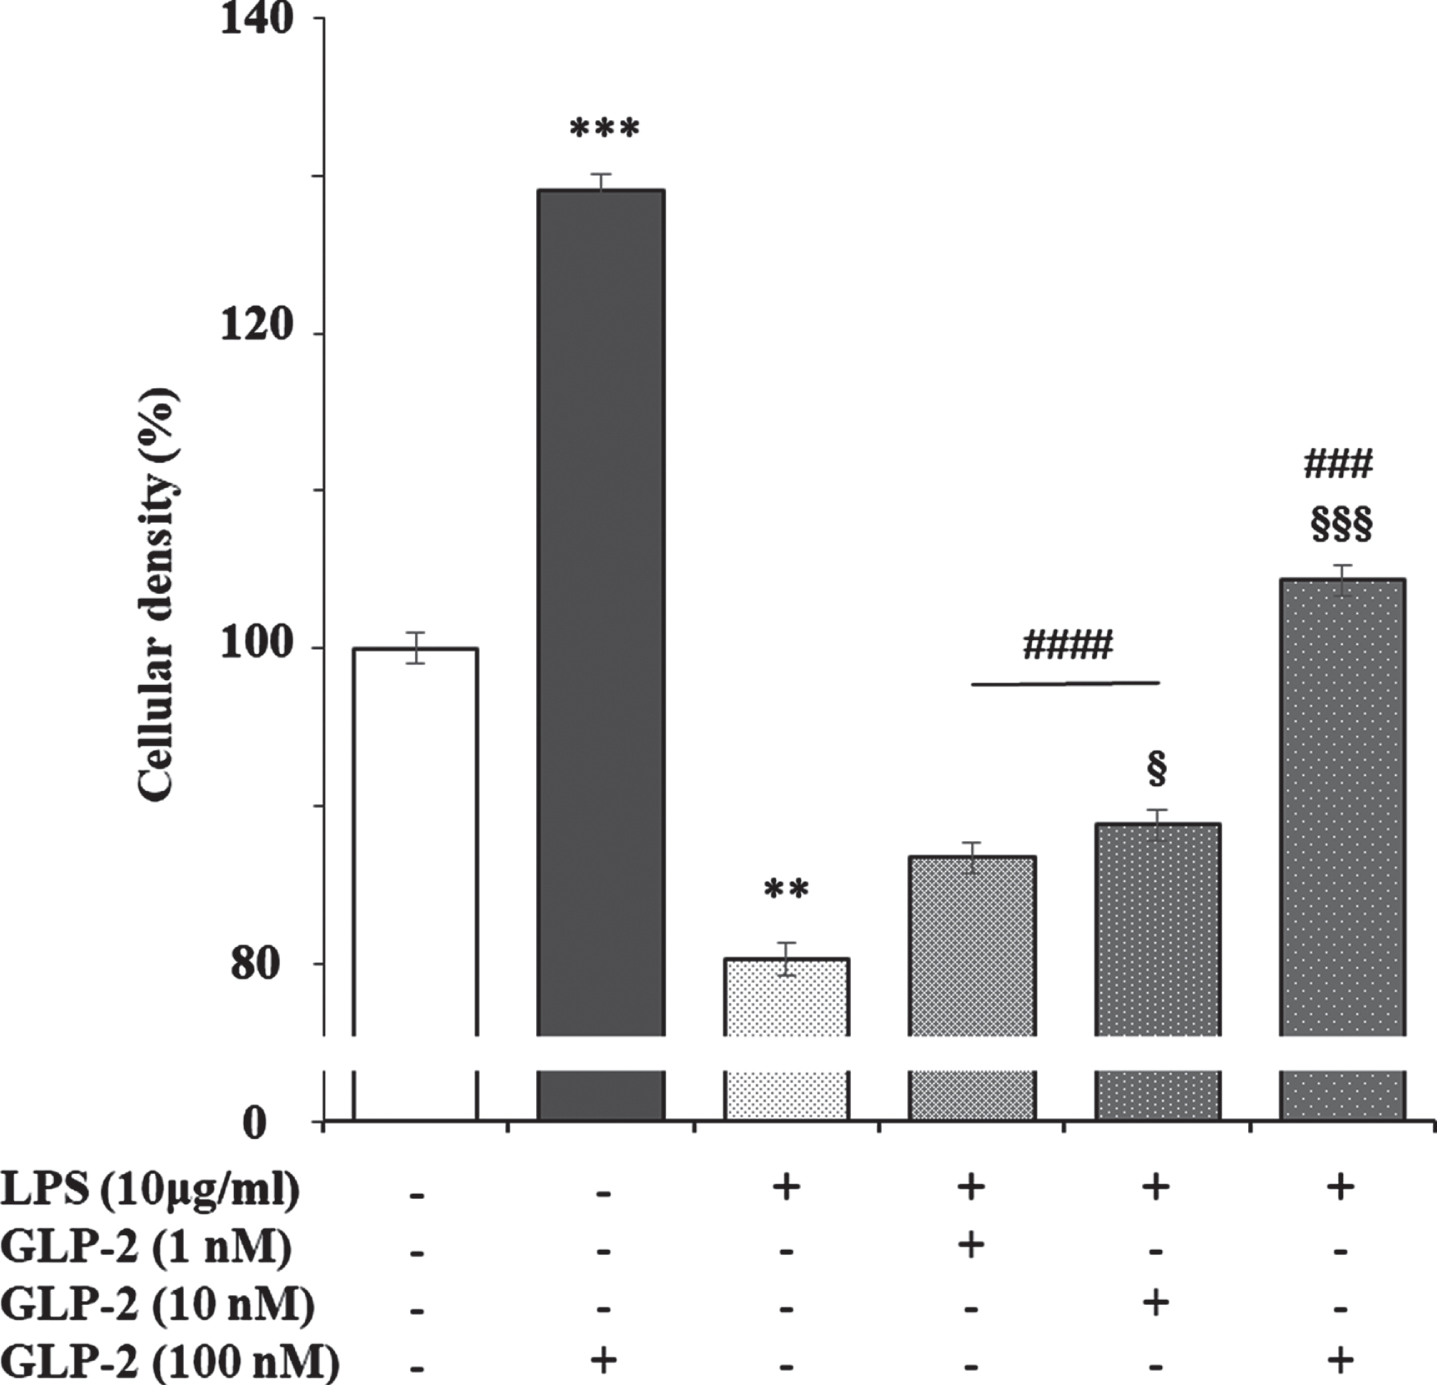 Effect of GLP-2, LPS, and LPS plus GLP-2 on the cellular density of cultured rat astrocytes. Astrocytes (in 24-well plates) were incubated in a serum-free DMEM/F-12 medium, supplemented with 2 mg/mL BSA, with the treatments indicated in the figure for 24 h. After the end of the incubation time, the reactions were stopped by removing the supernatants and immediately washing the cells three times with ice cold phosphate buffered saline. Then 250μL of 2 mg/mL crystal violet in 2% (v/v) ethanol was added to each well. After 1 h at room temperature, the cells were washed several times with distilled water, air-dried, and then eluted in 1% (w/v) SDS. Optical density at 560 nm was determined on 96-well multi-plates in a Varioskan Thermo Electron Corporation reader (Software ScanIt 2.0.91). Results are expressed as absorbance per well and presented as the mean±standard error of the means (n = 8). **p < 0.01; ***p < 0.005, significant effect of GLP-2 and LPS treatments on cell density compared to untreated cells. §p < 0.05; §§§p < 0.005, significant effect of LPS+GLP-2 compared to LPS alone. ###p < 0.005; ####p < 0.001, significant effect of LPS+GLP-2 compared to GLP-2 alone, using 1-way ANOVA with Tukey correction.